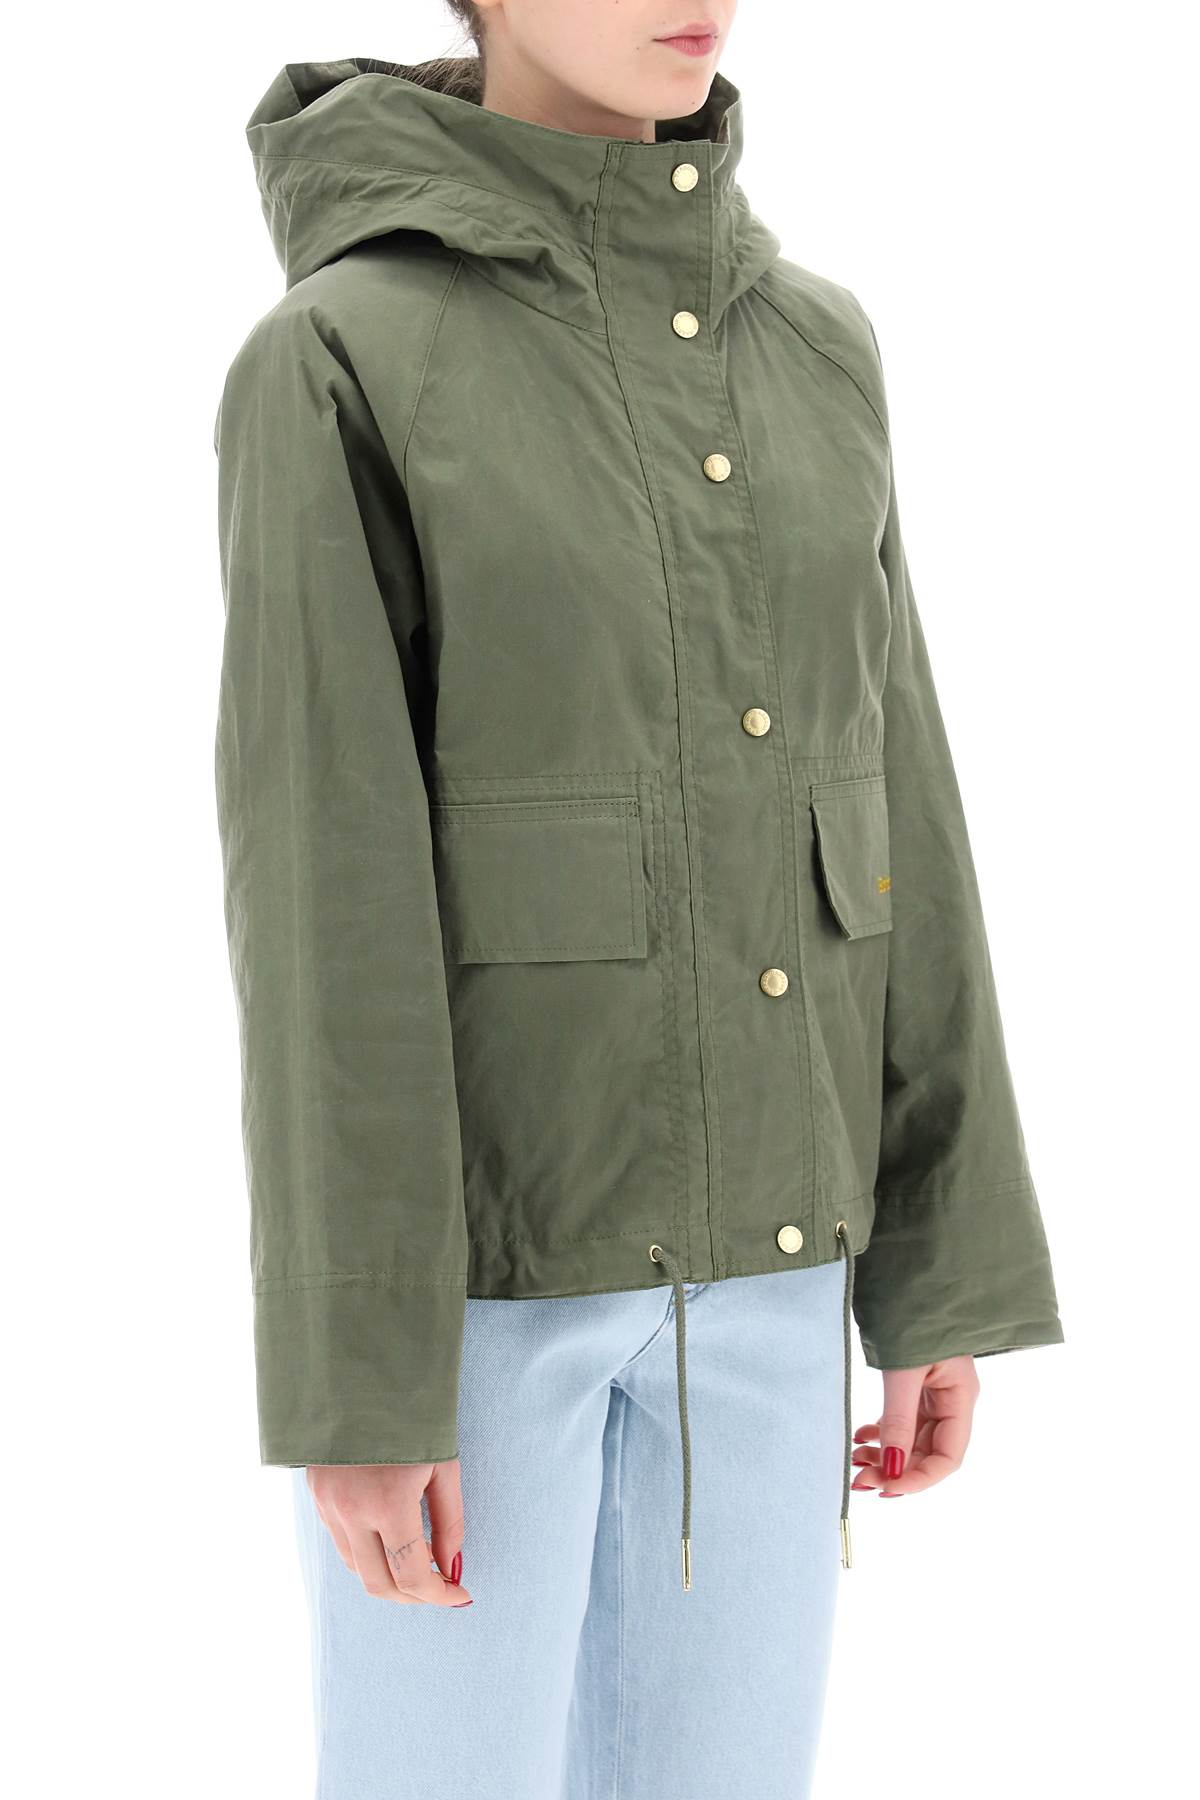 Barbour nith hooded jacket with-1